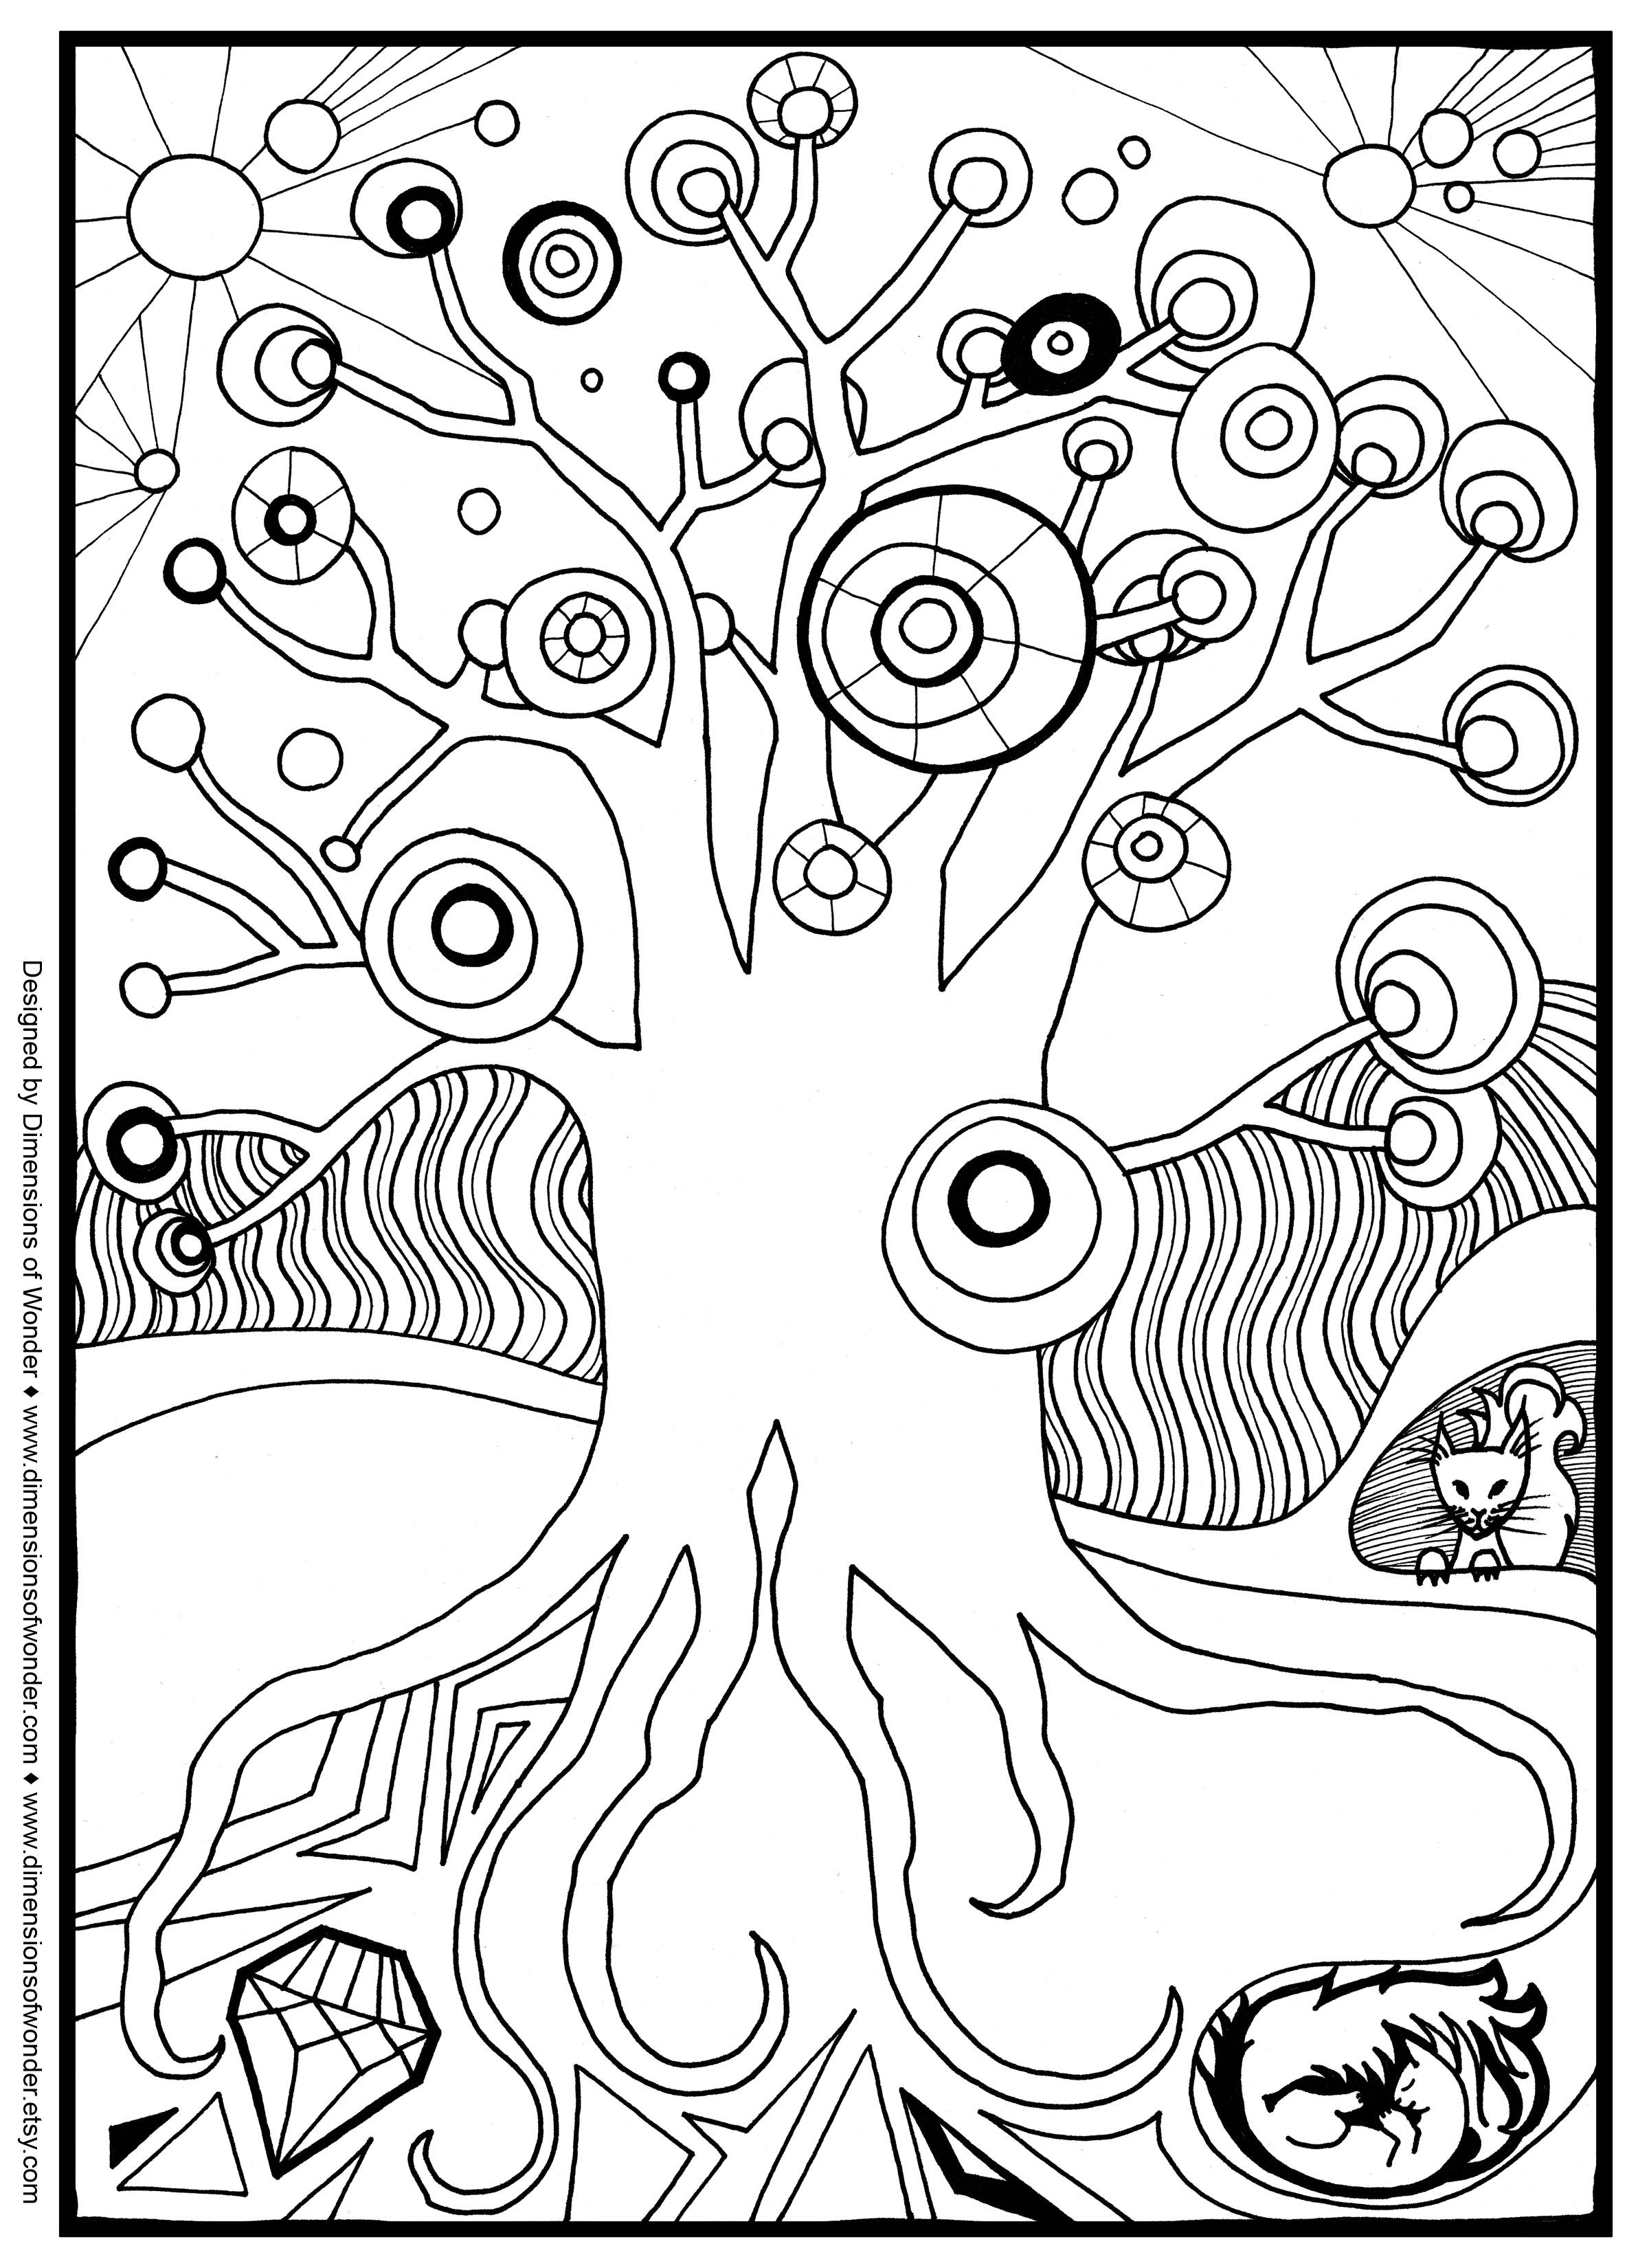 Printable Nature Coloring Pages For Adults at GetDrawings | Free download